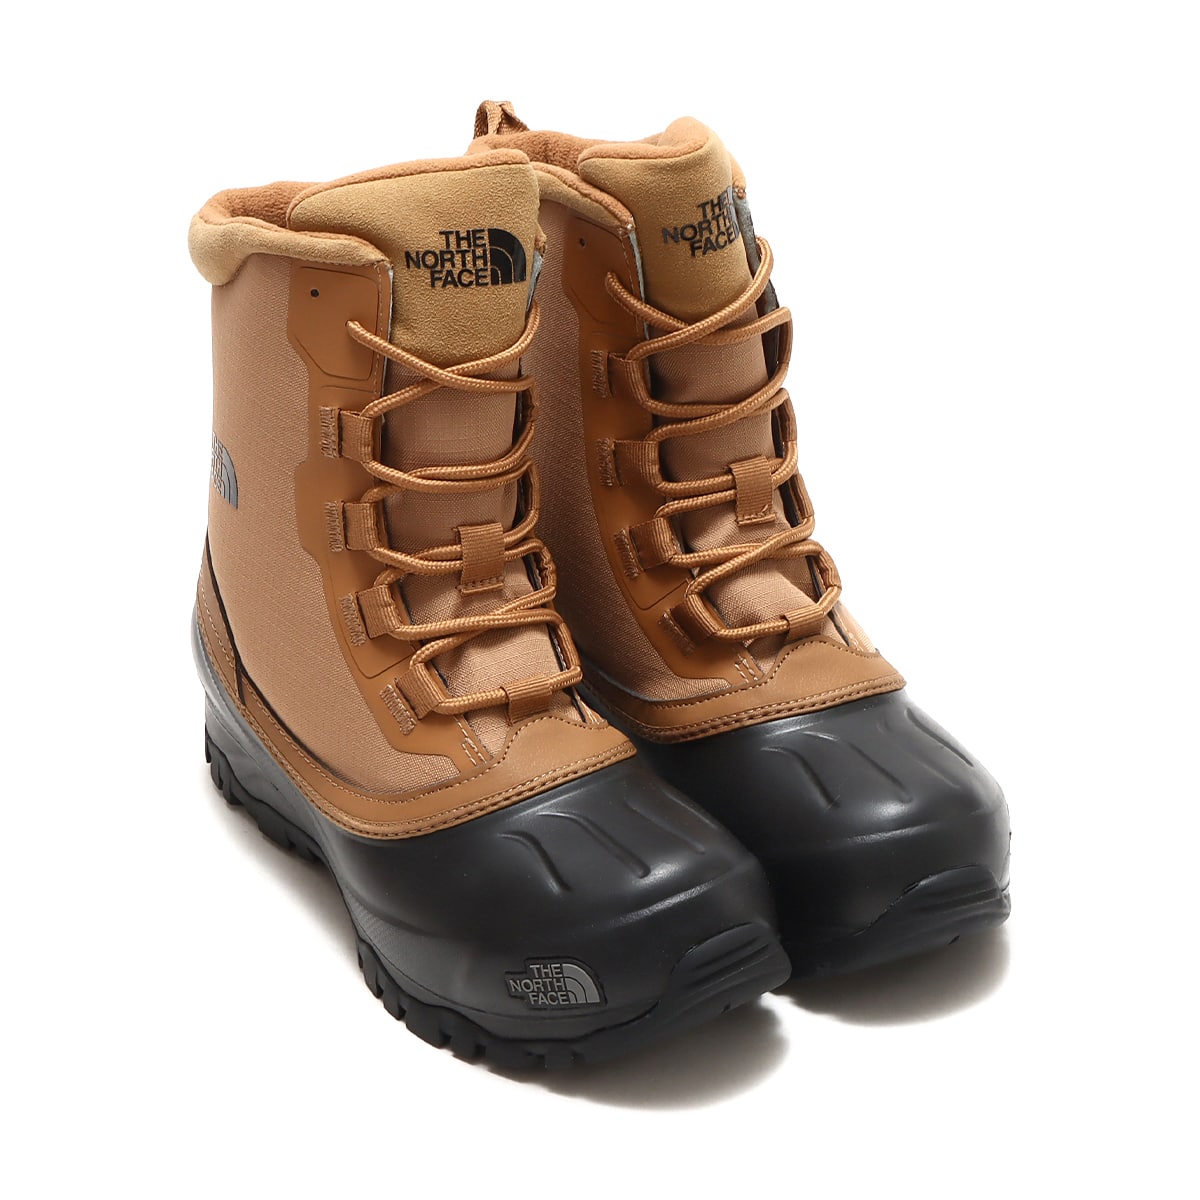 THE NORTH FACE Snow shot 6"Boot TXⅡ